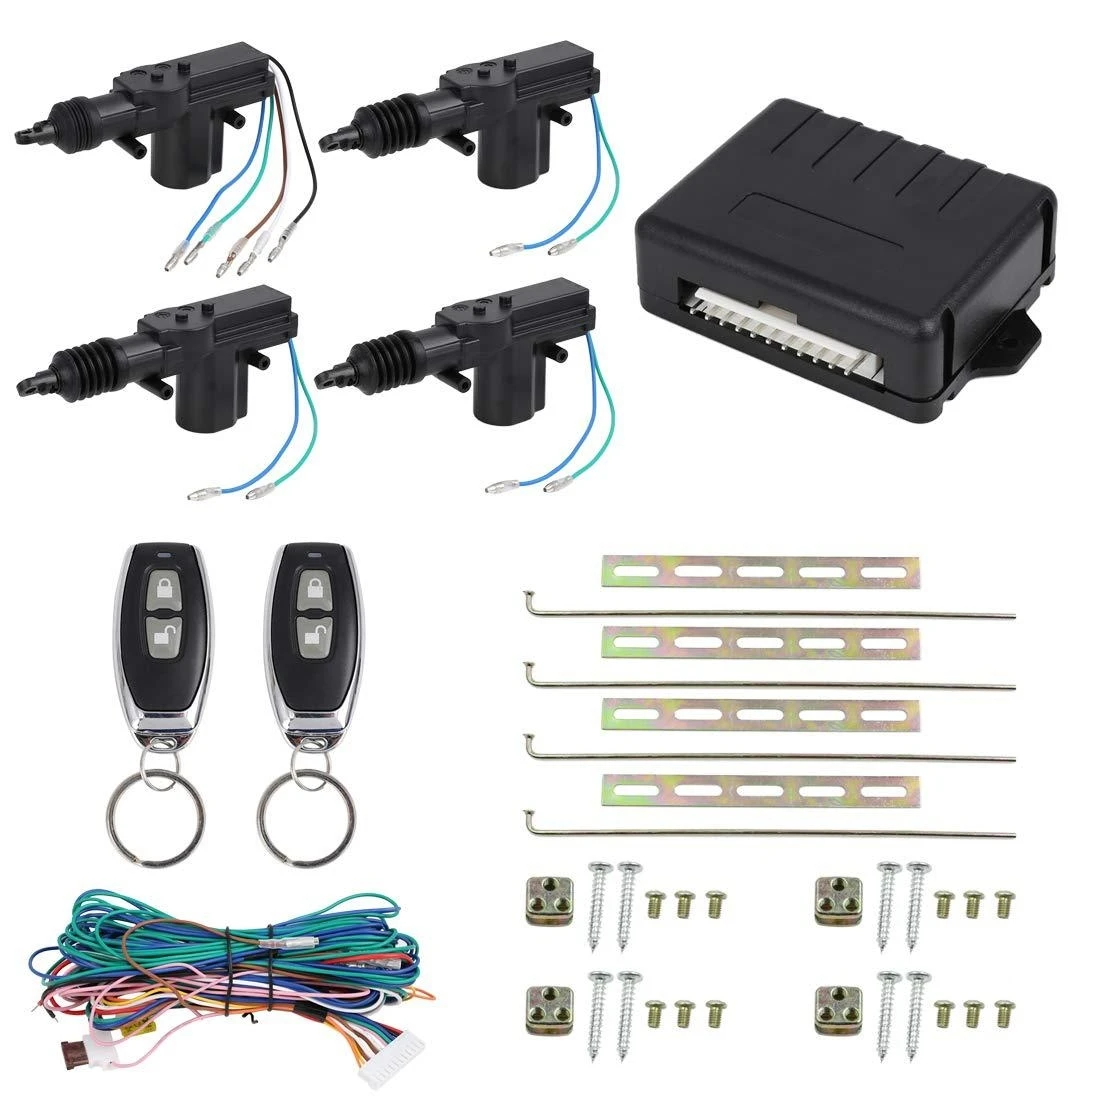 

Universal 4 Doors Central Lock Locking Remote Control System Car Keyless Entry System Kit with Actuator for 12V Vehicles